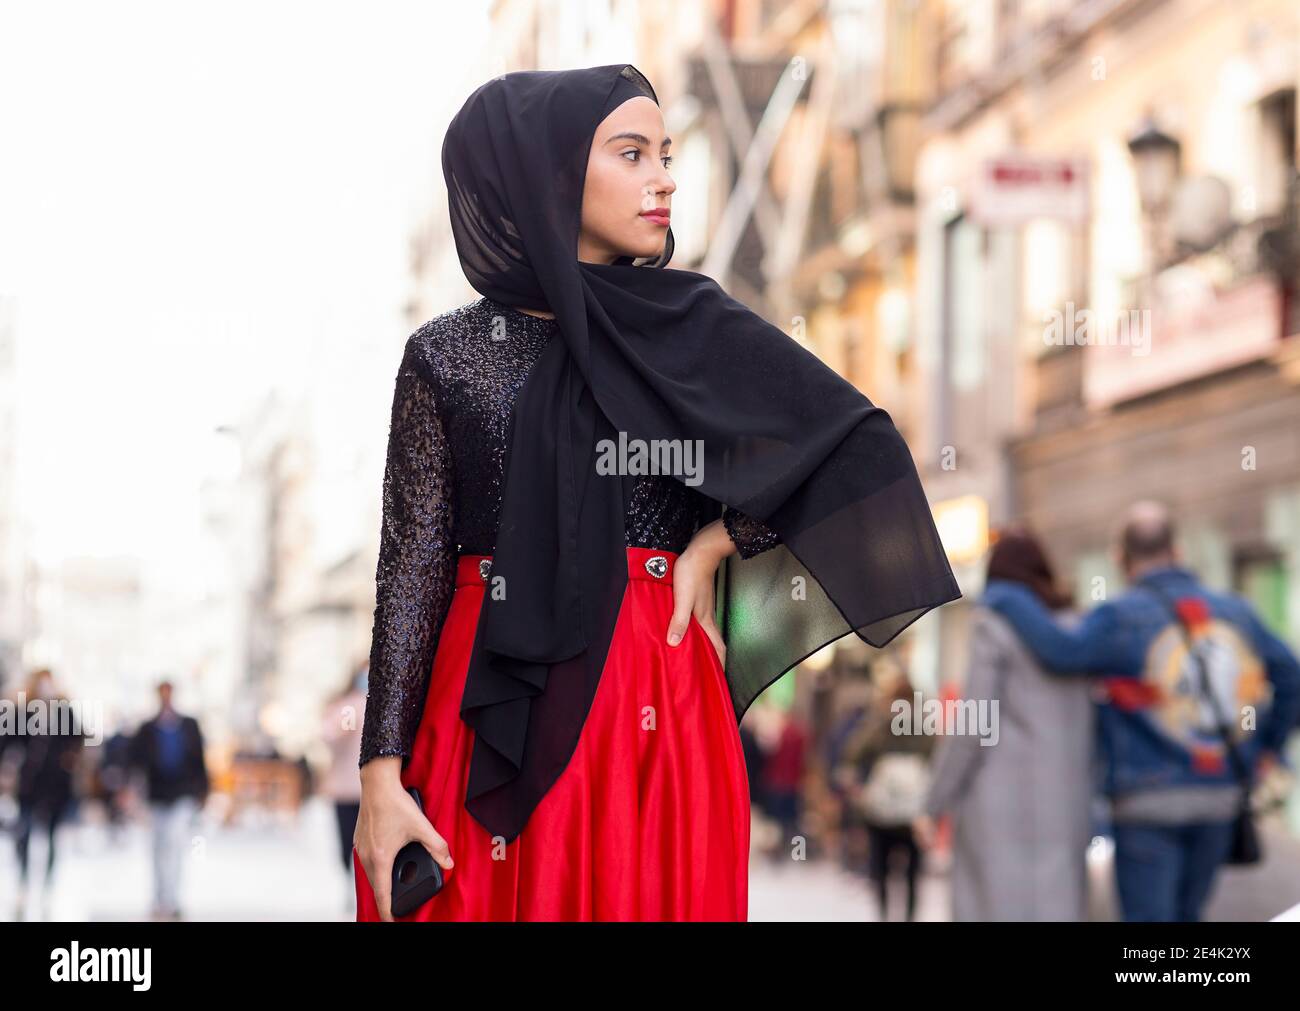 Portrait of young woman wearing black hijab posing outdoors with hand on hip Stock Photo